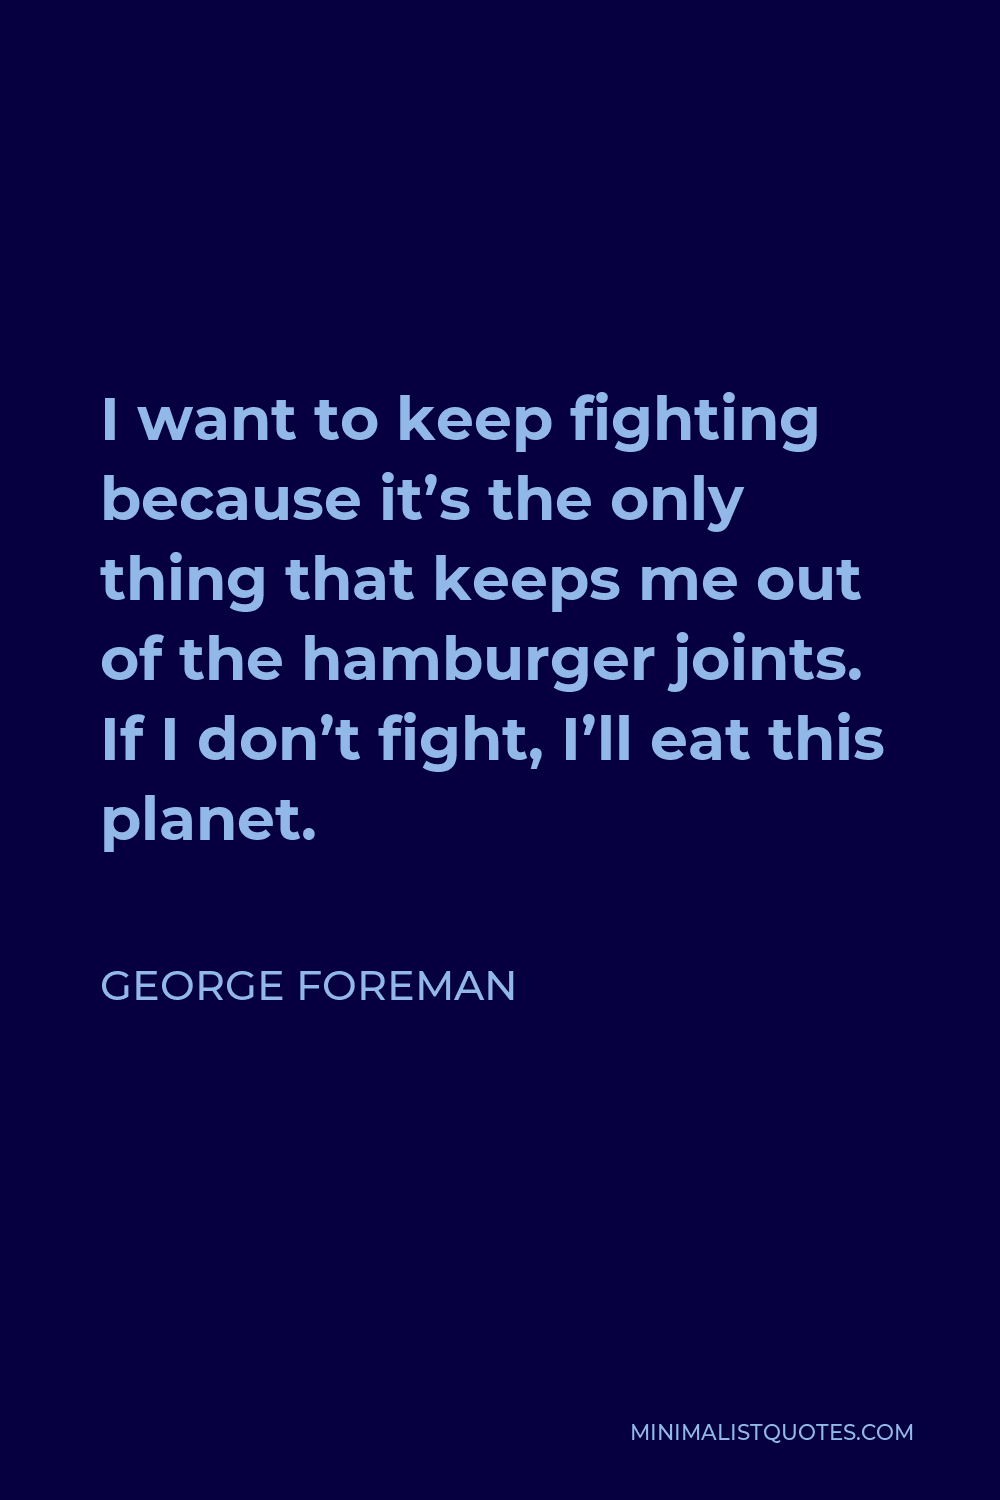 George Foreman Quote - I want to keep fighting because it’s the only thing that keeps me out of the hamburger joints. If I don’t fight, I’ll eat this planet.